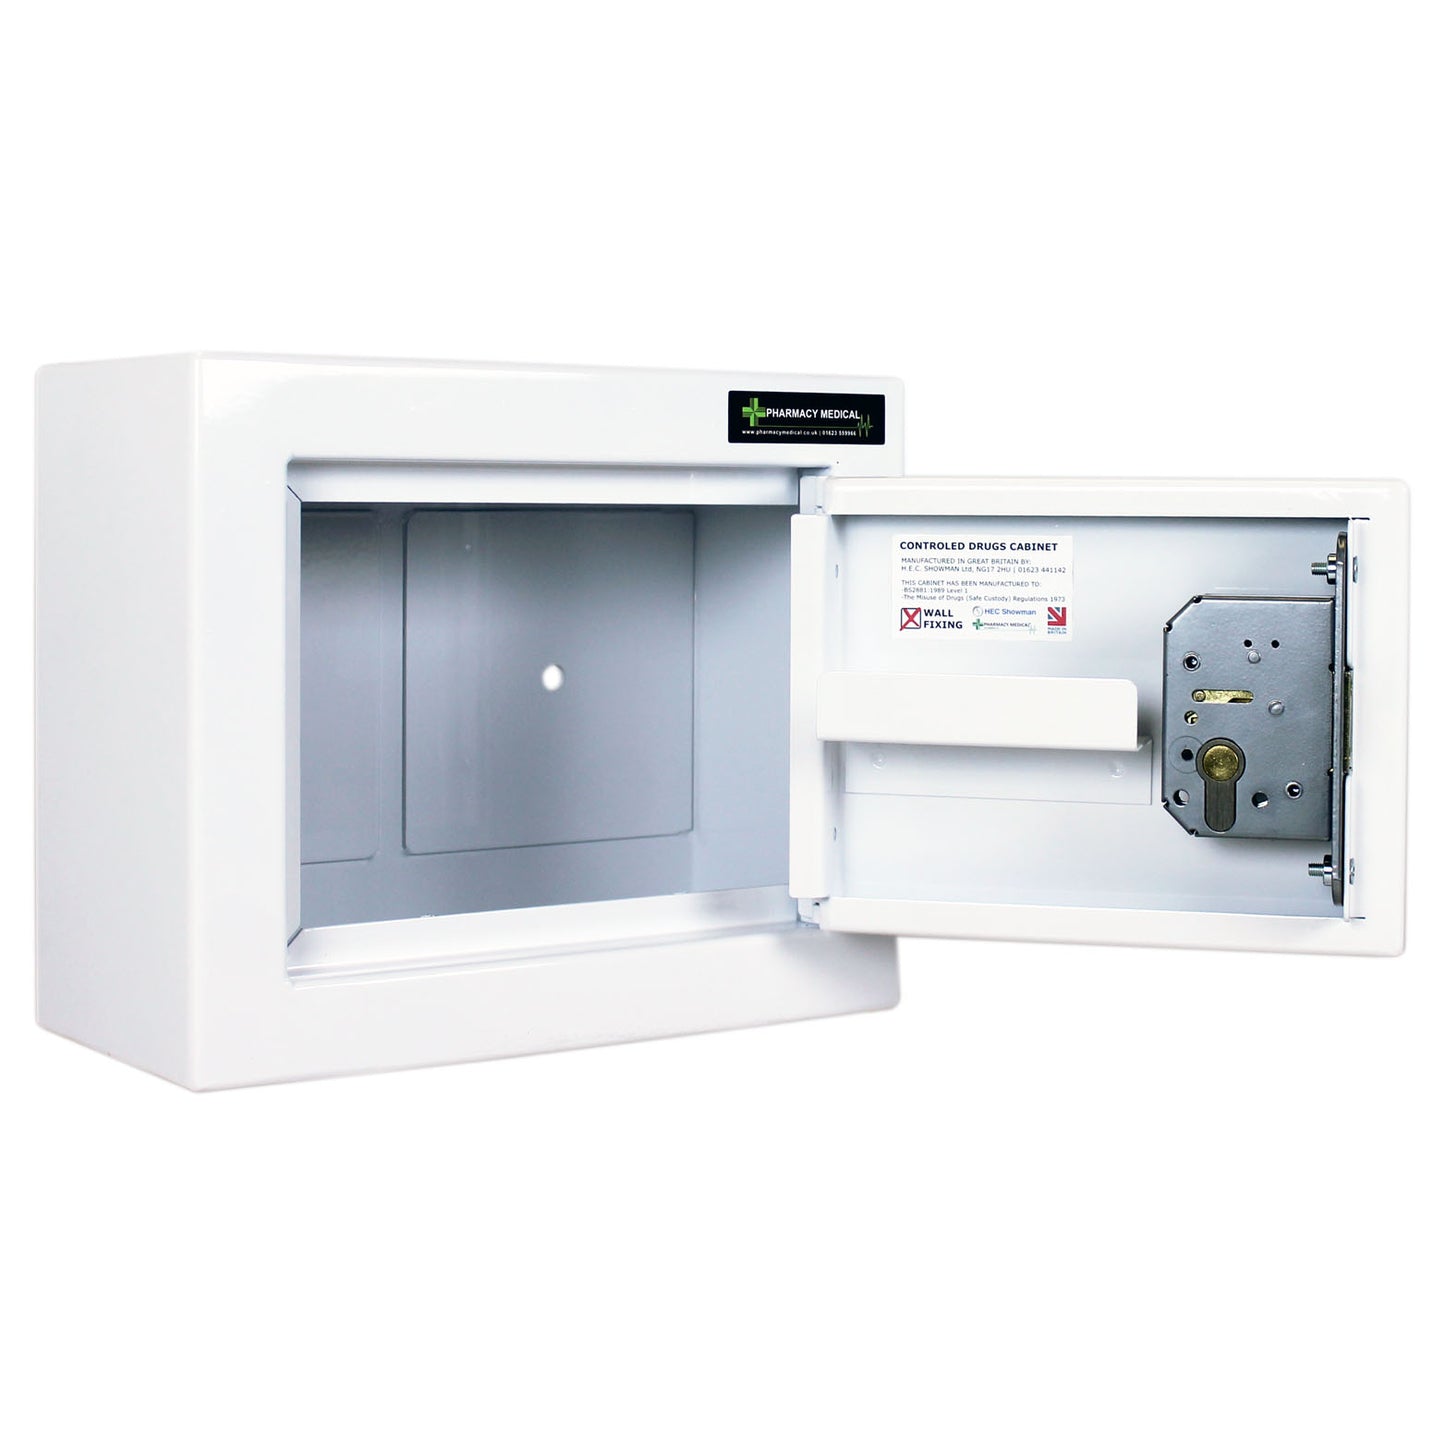 Pharmacy Medical - HECDC100 CONTROLLED DRUGS CABINET | 1 DOOR SHELF (Fixed) | R or L HINGE